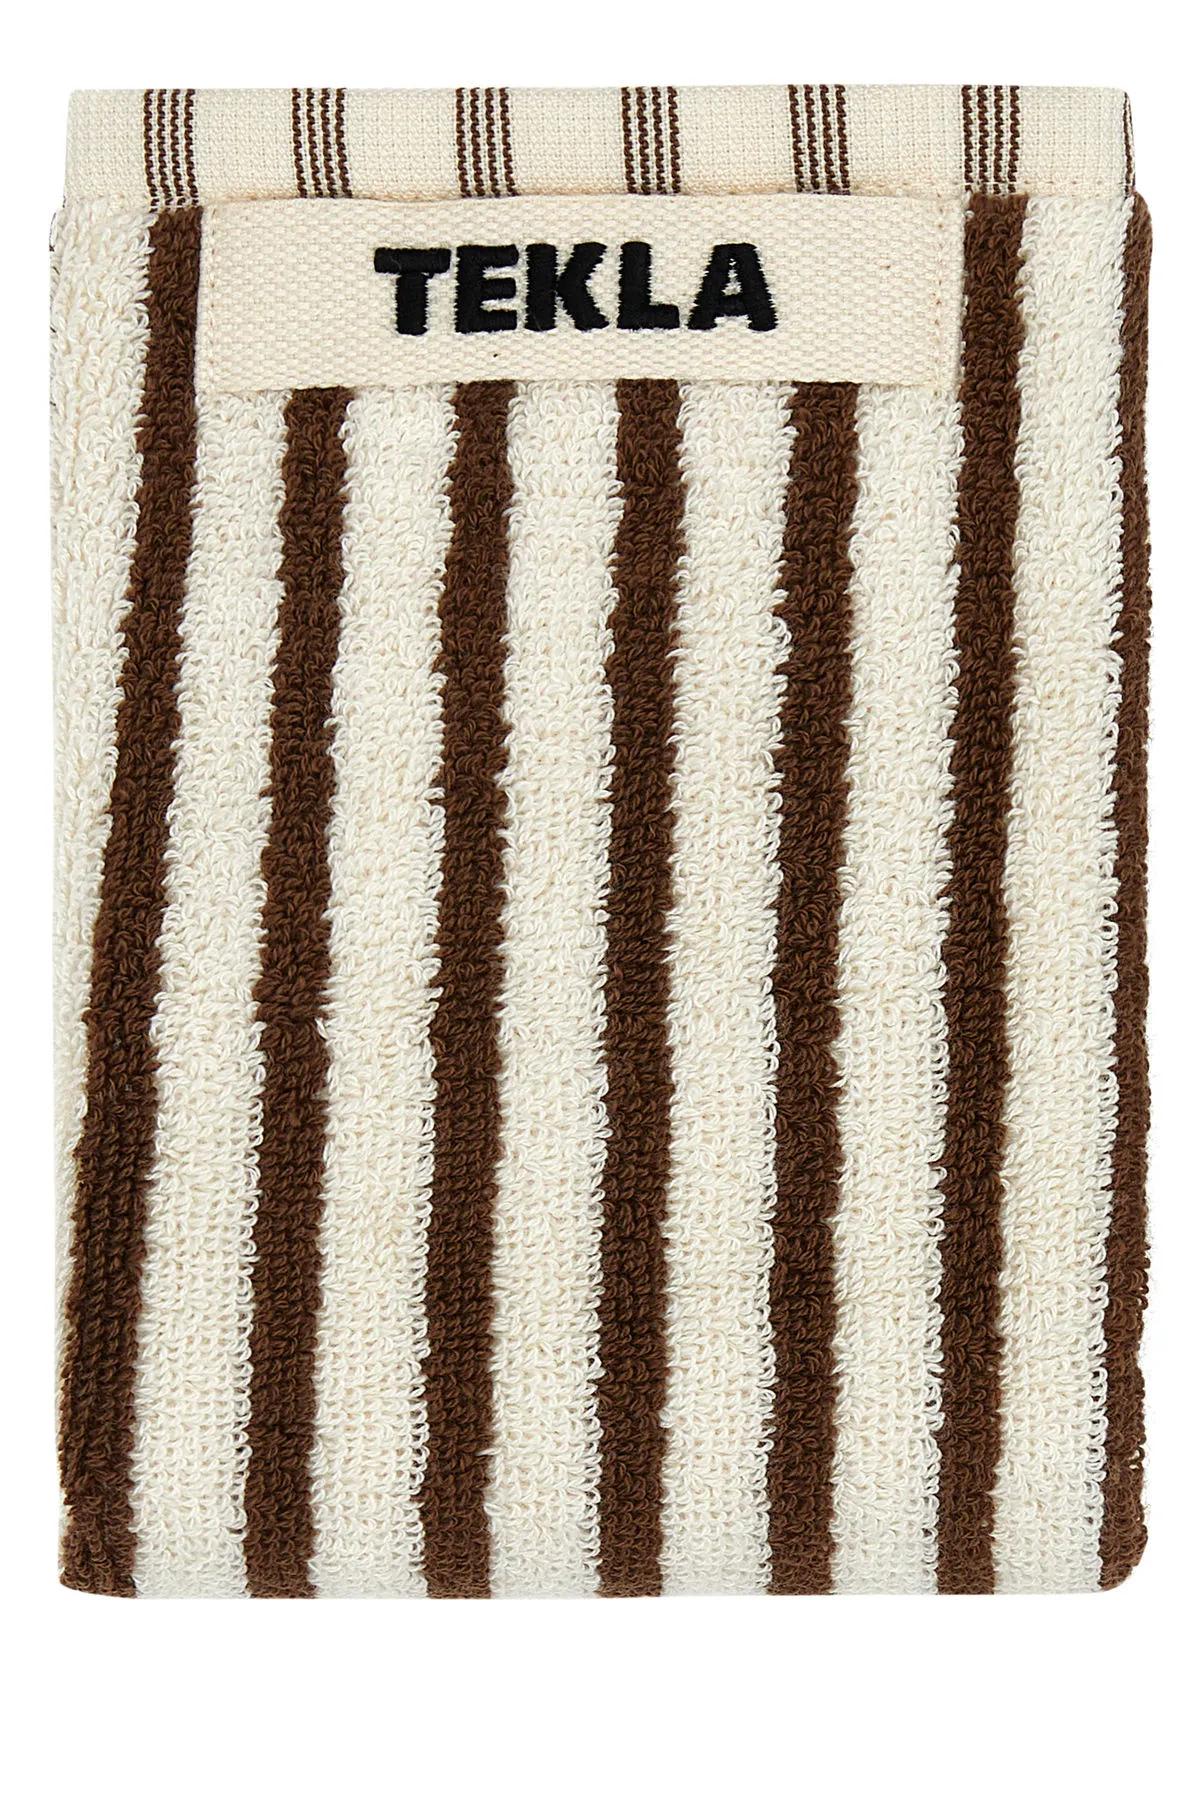 Tekla Embroidered Terry Towel In Brown